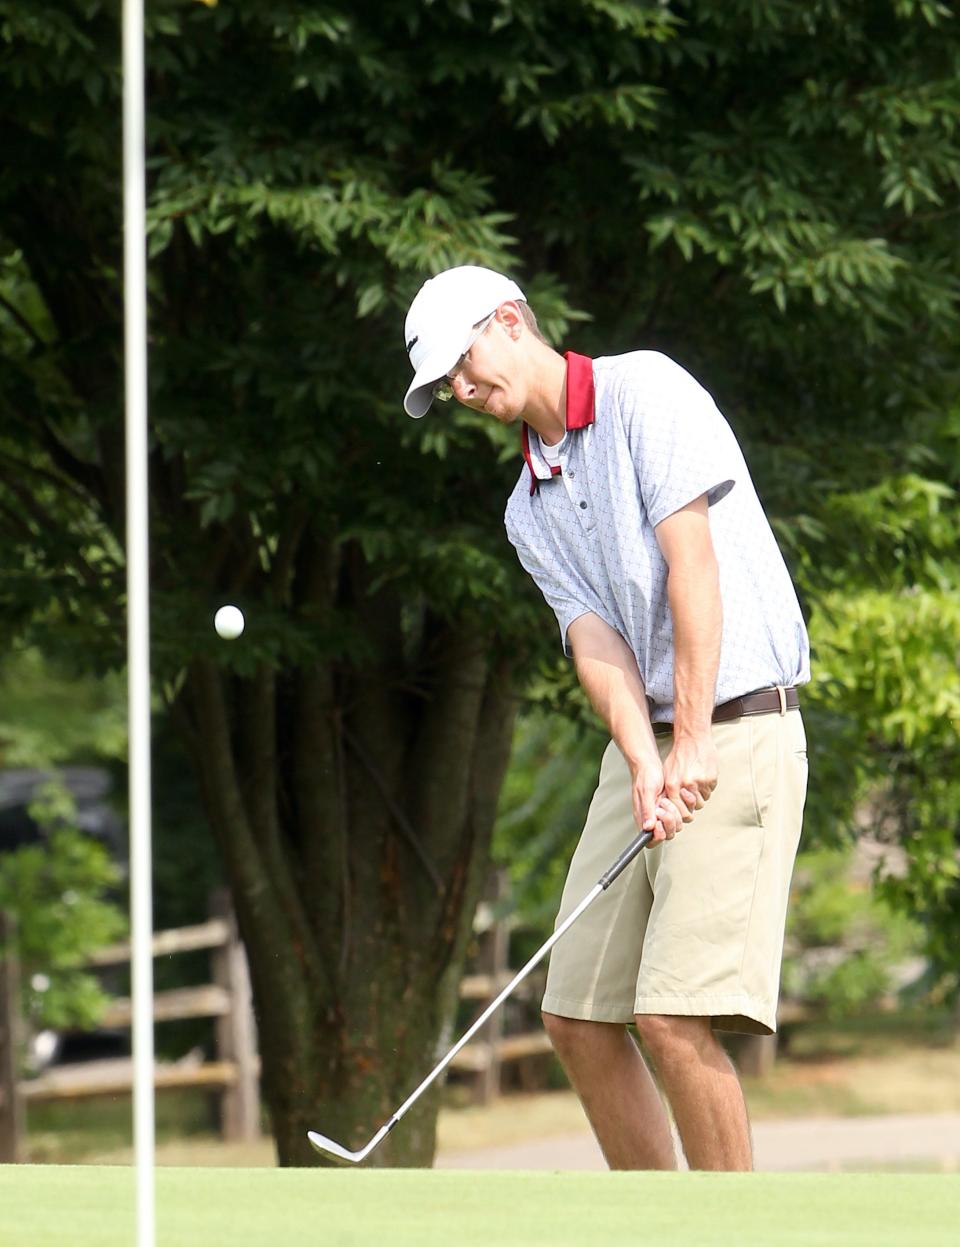 Brad McLaughlin sends chips onto the first green at Cascades Golf Course during the City Golf Qualifying Tournament on Sunday, June 26, 2022.